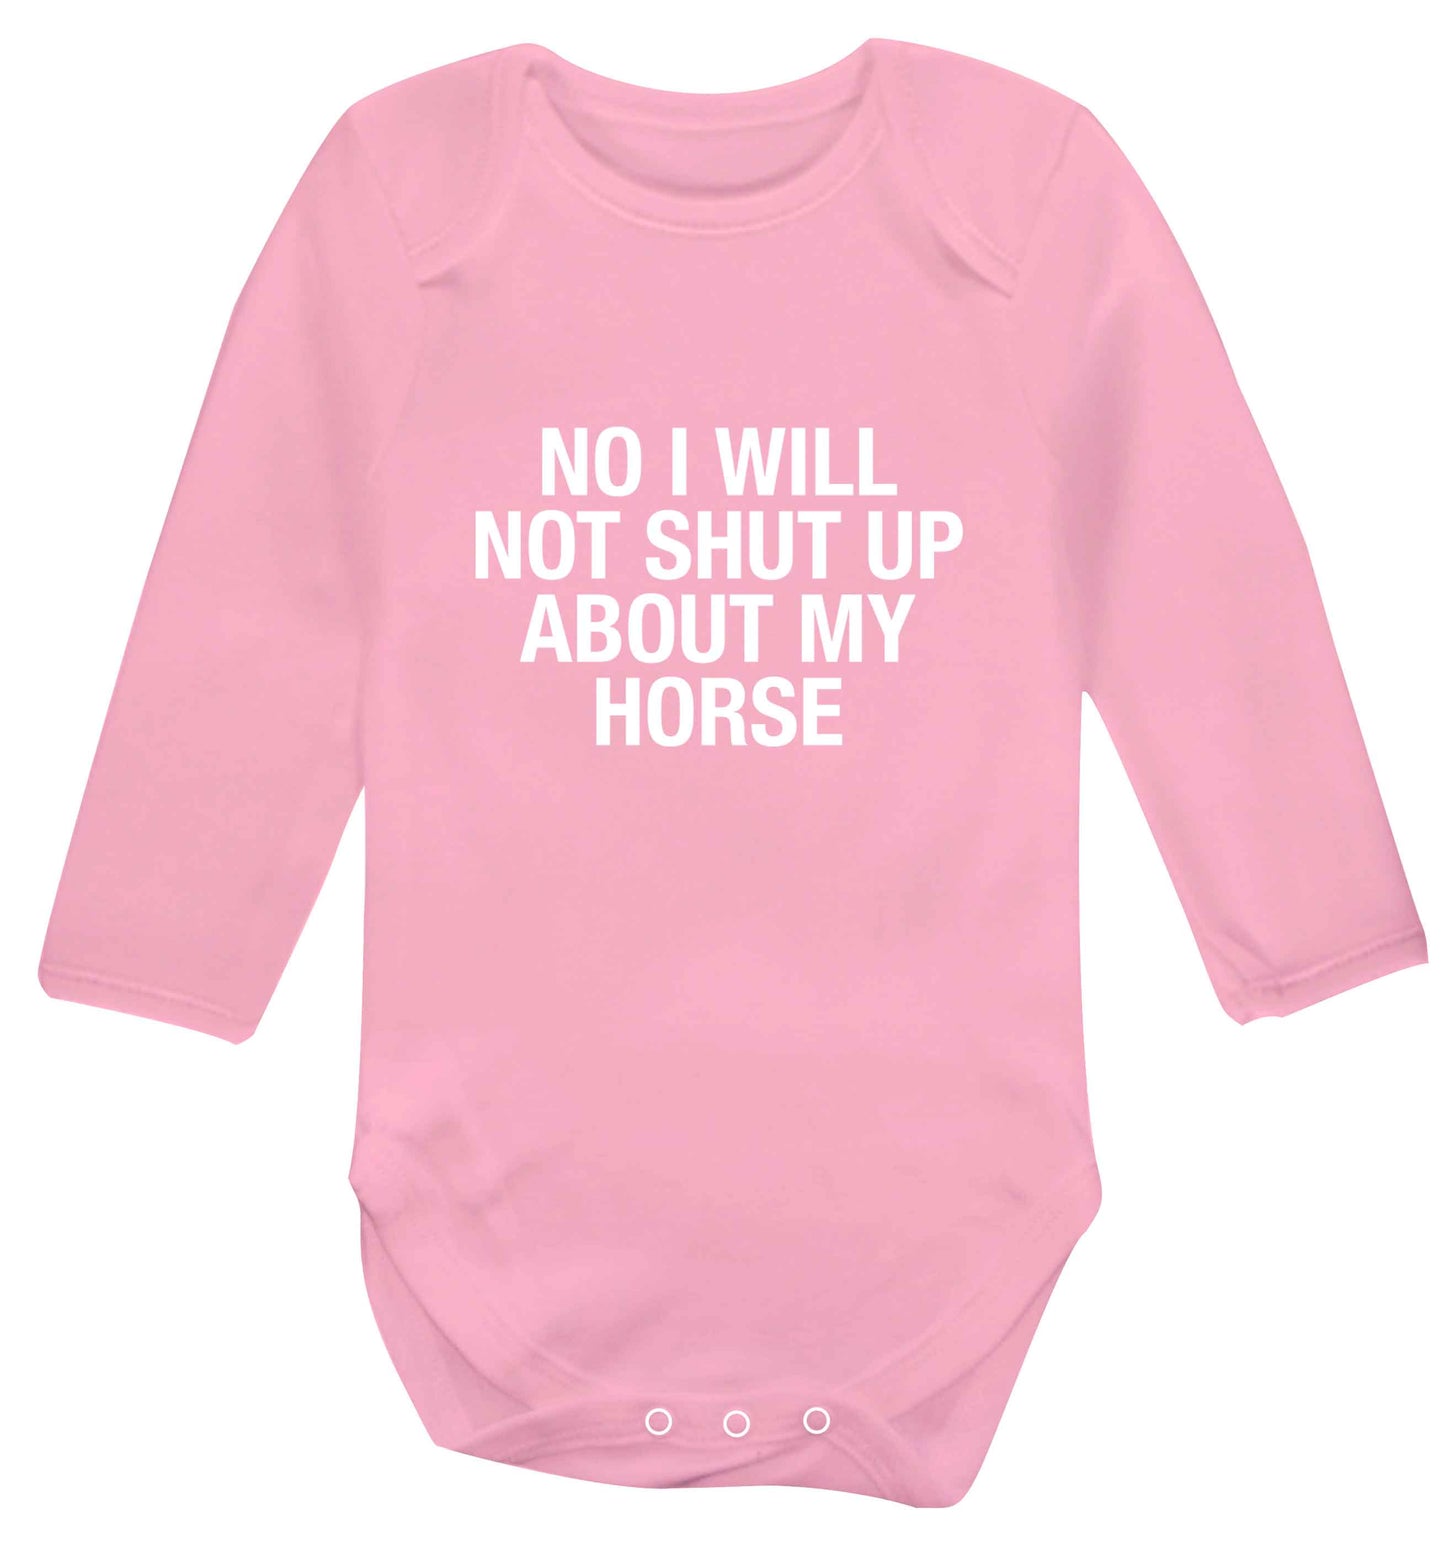 No I will not shut up talking about my horse baby vest long sleeved pale pink 6-12 months